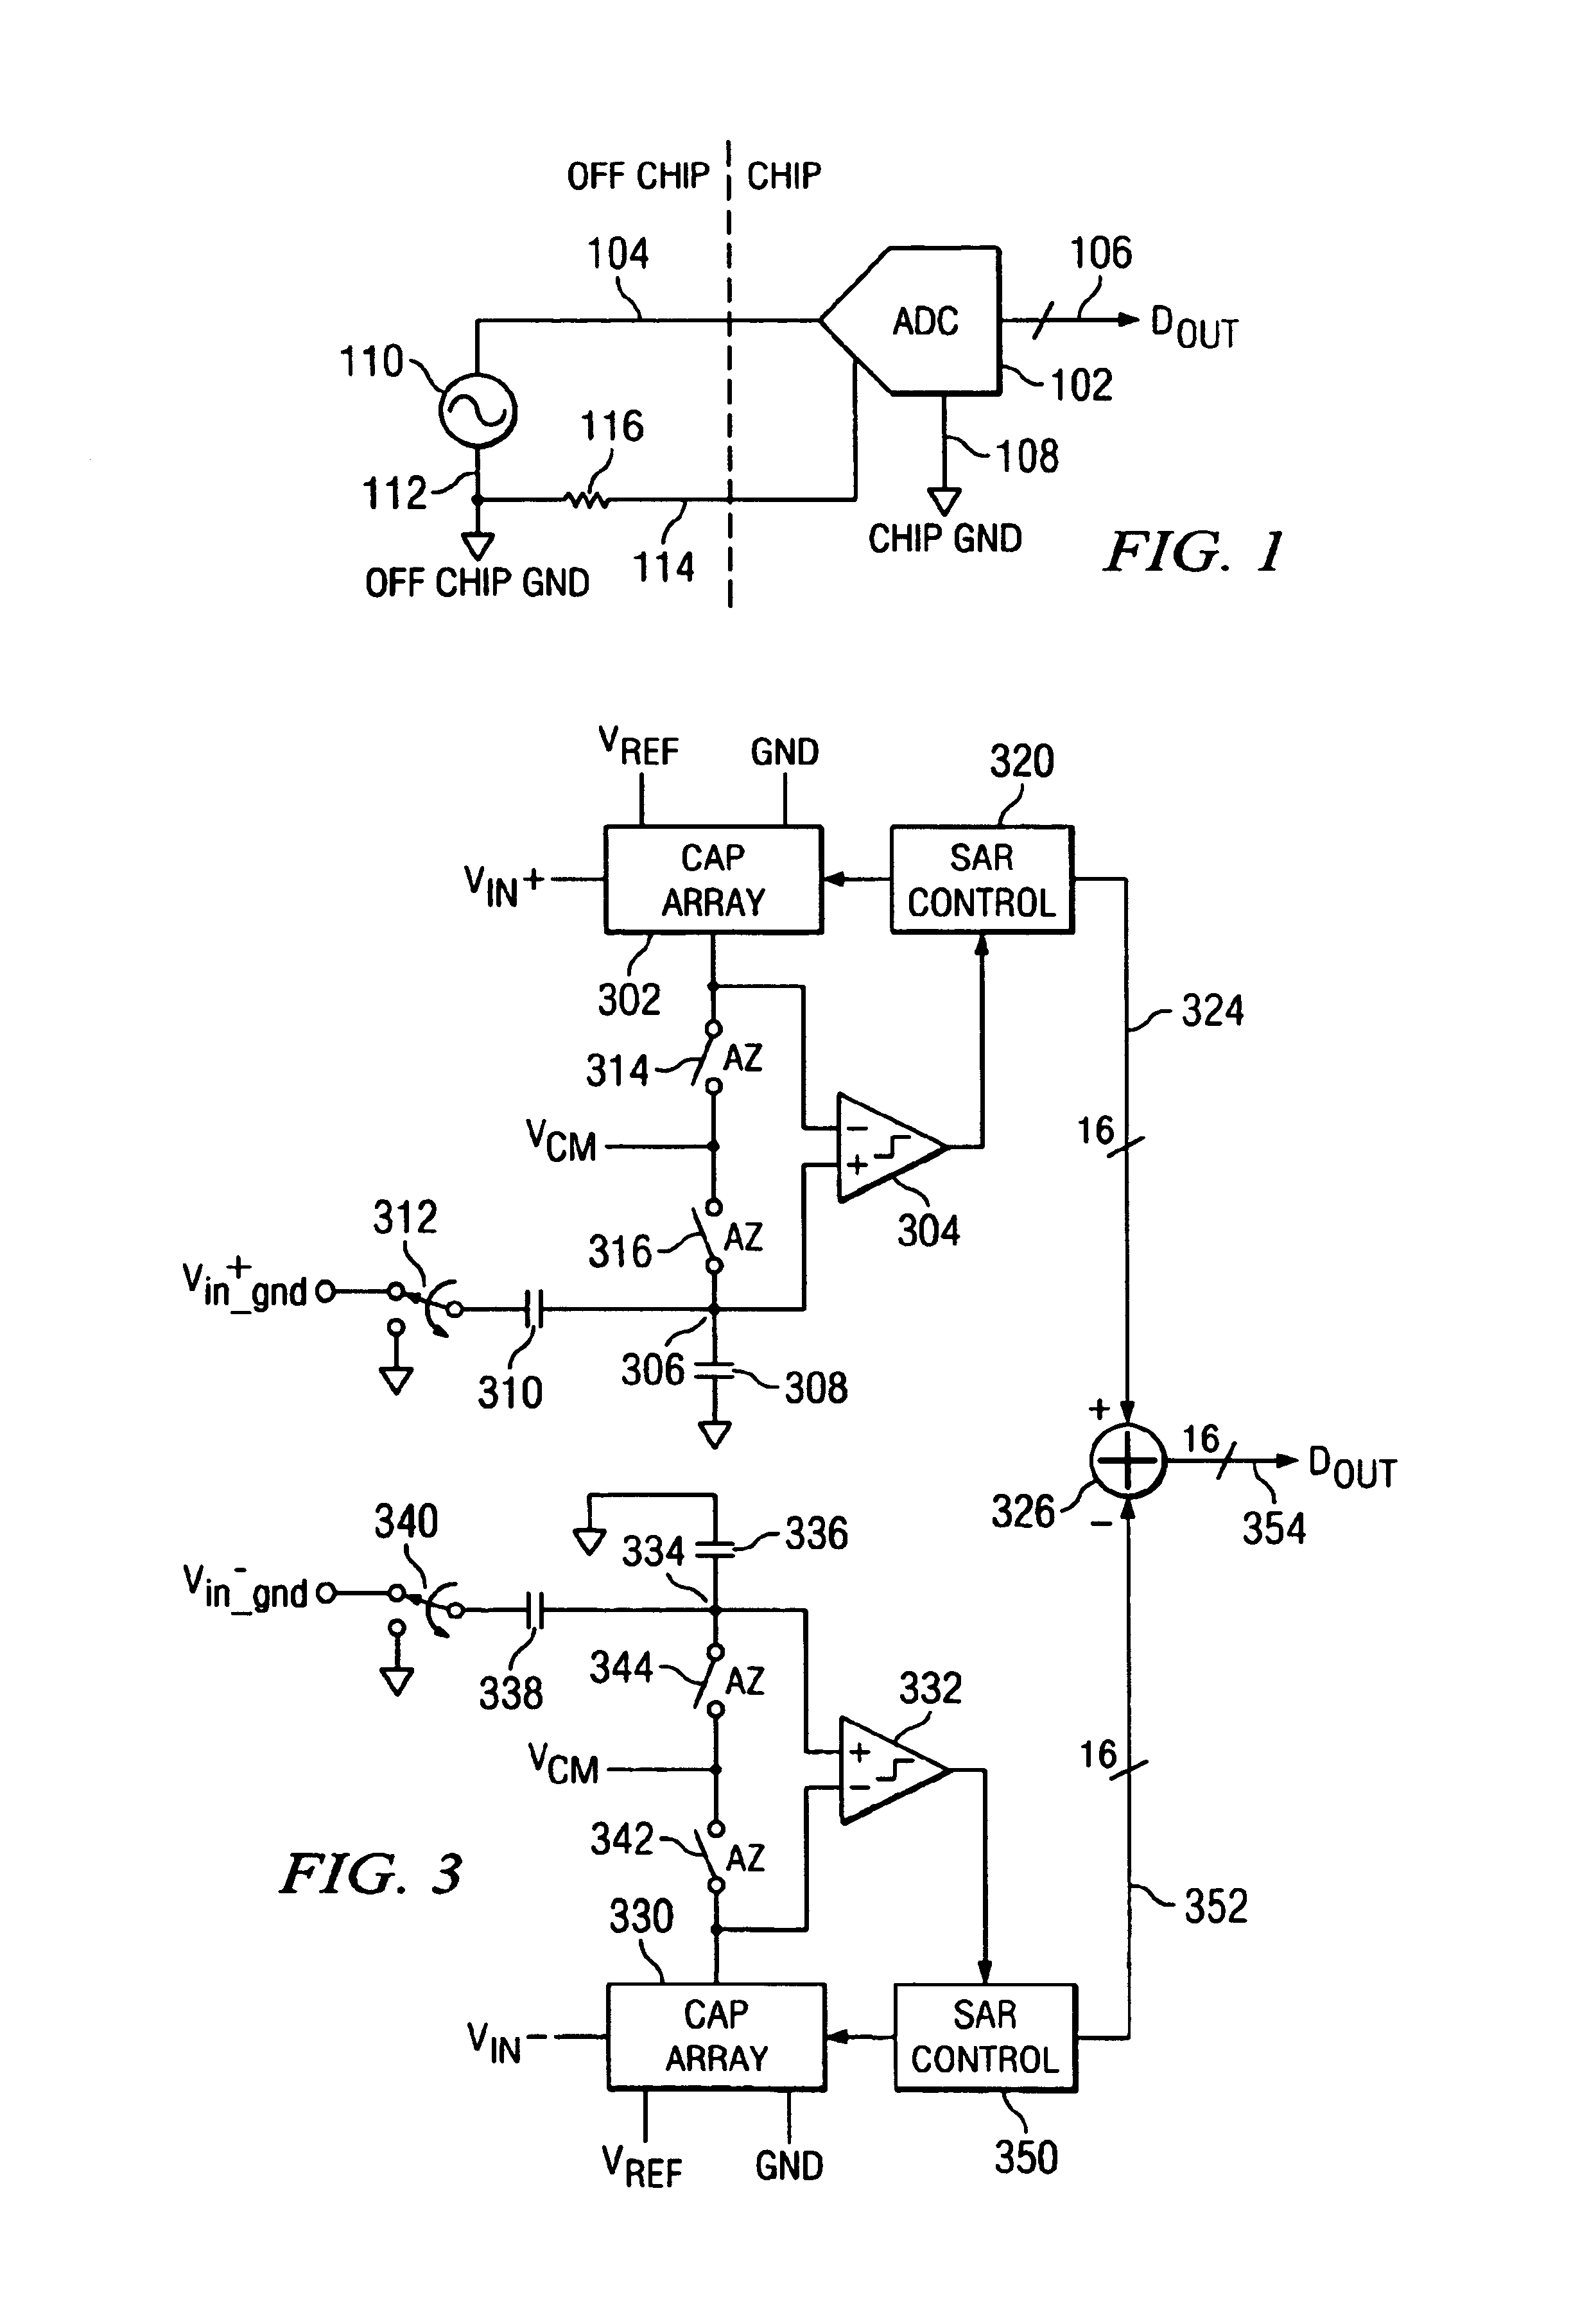 Noise cancellation in a single ended SAR converter